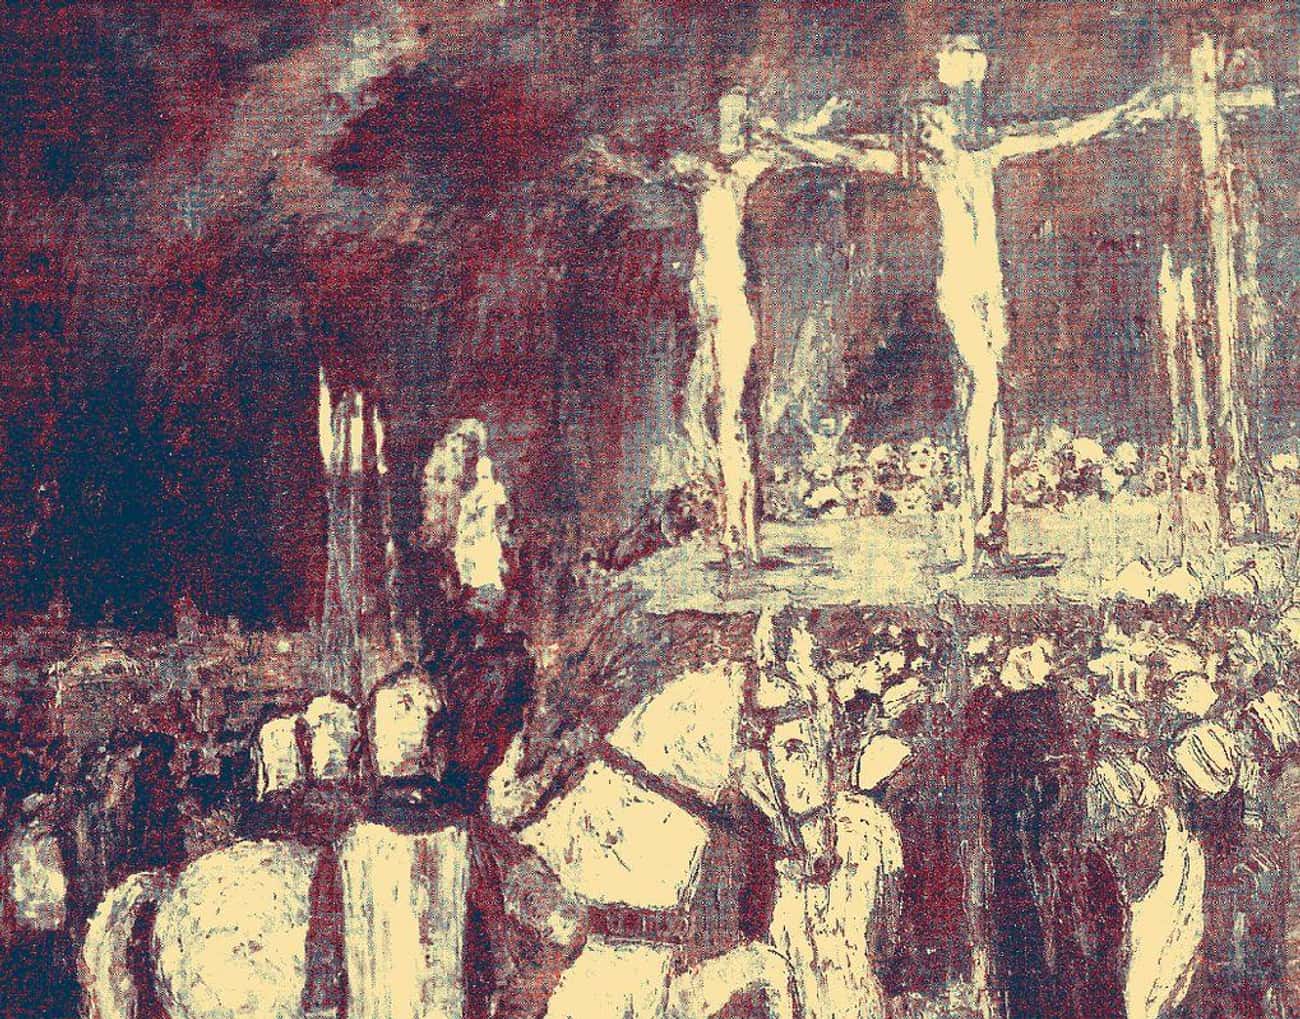 Crucifixion Was Used For Thousands Of Years Before Entering Japan